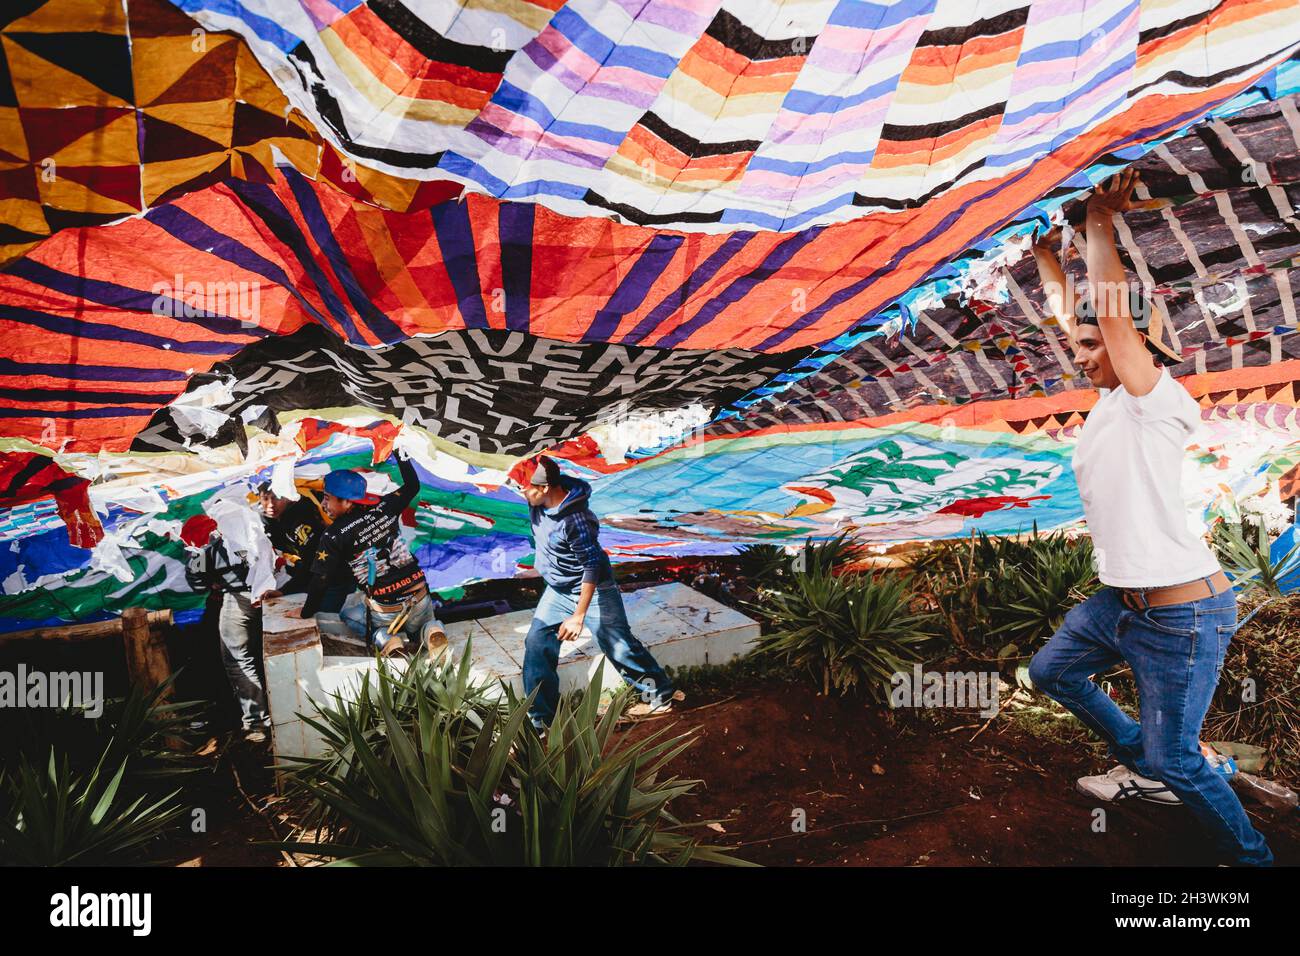 Giant kite festival in a cemetery - famous, traditional day of the dead celebration in Santiago, Guatemala. Stock Photo